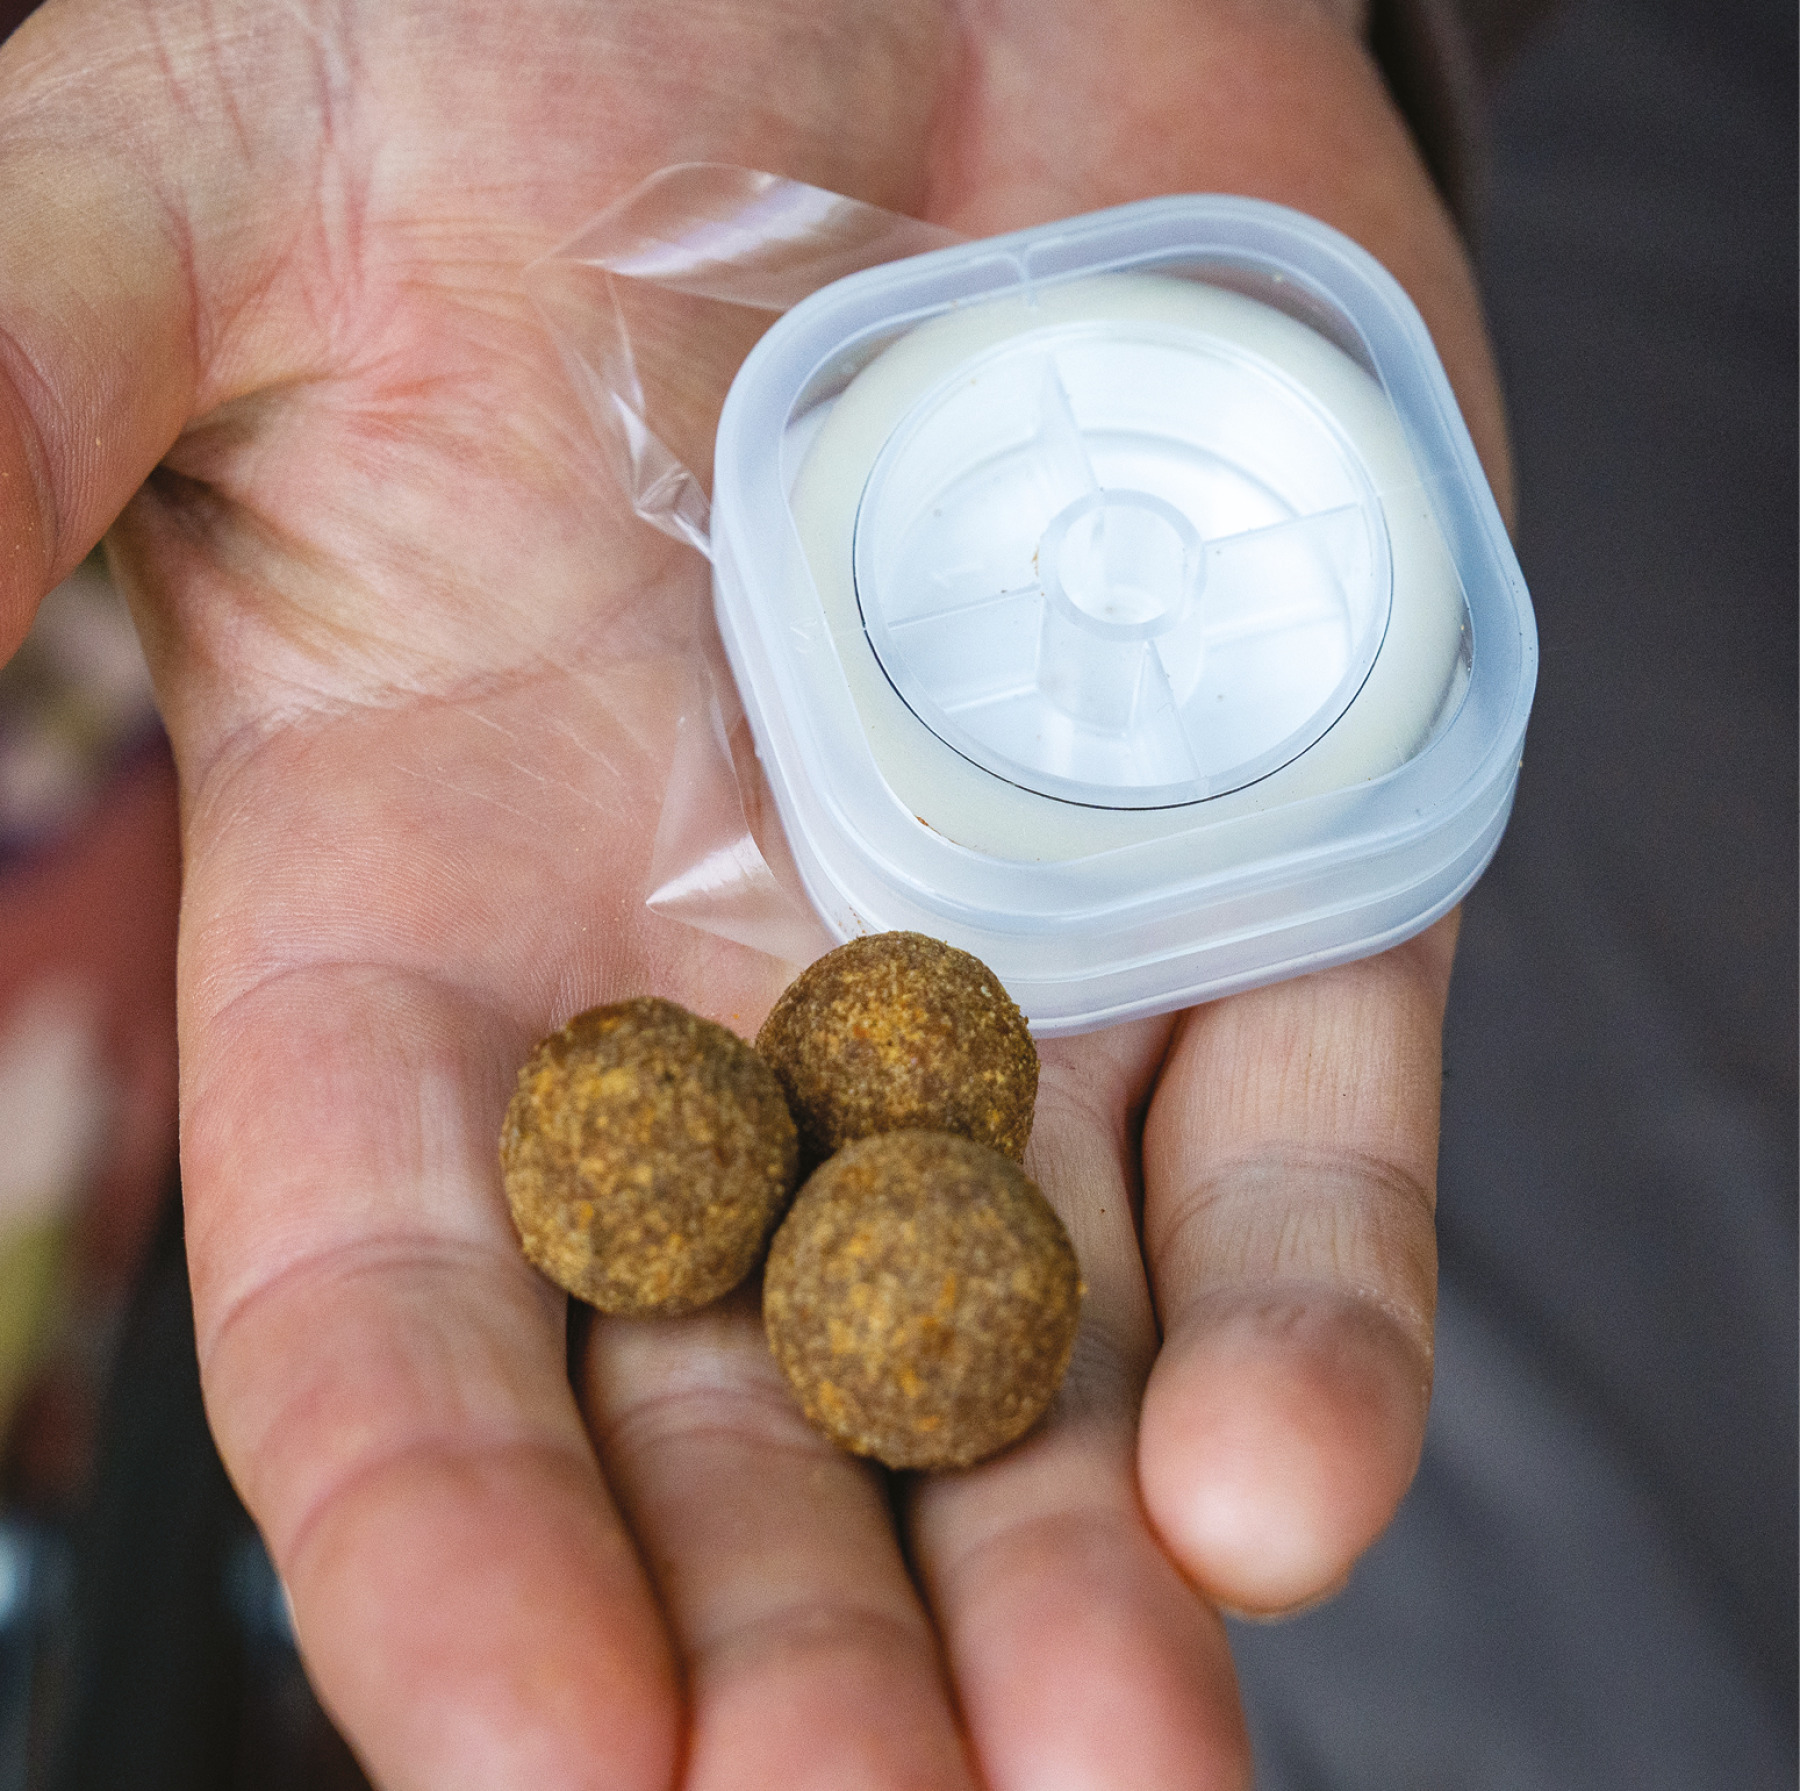 1. It’s as simple as this: three boilies and some PVA tape! 